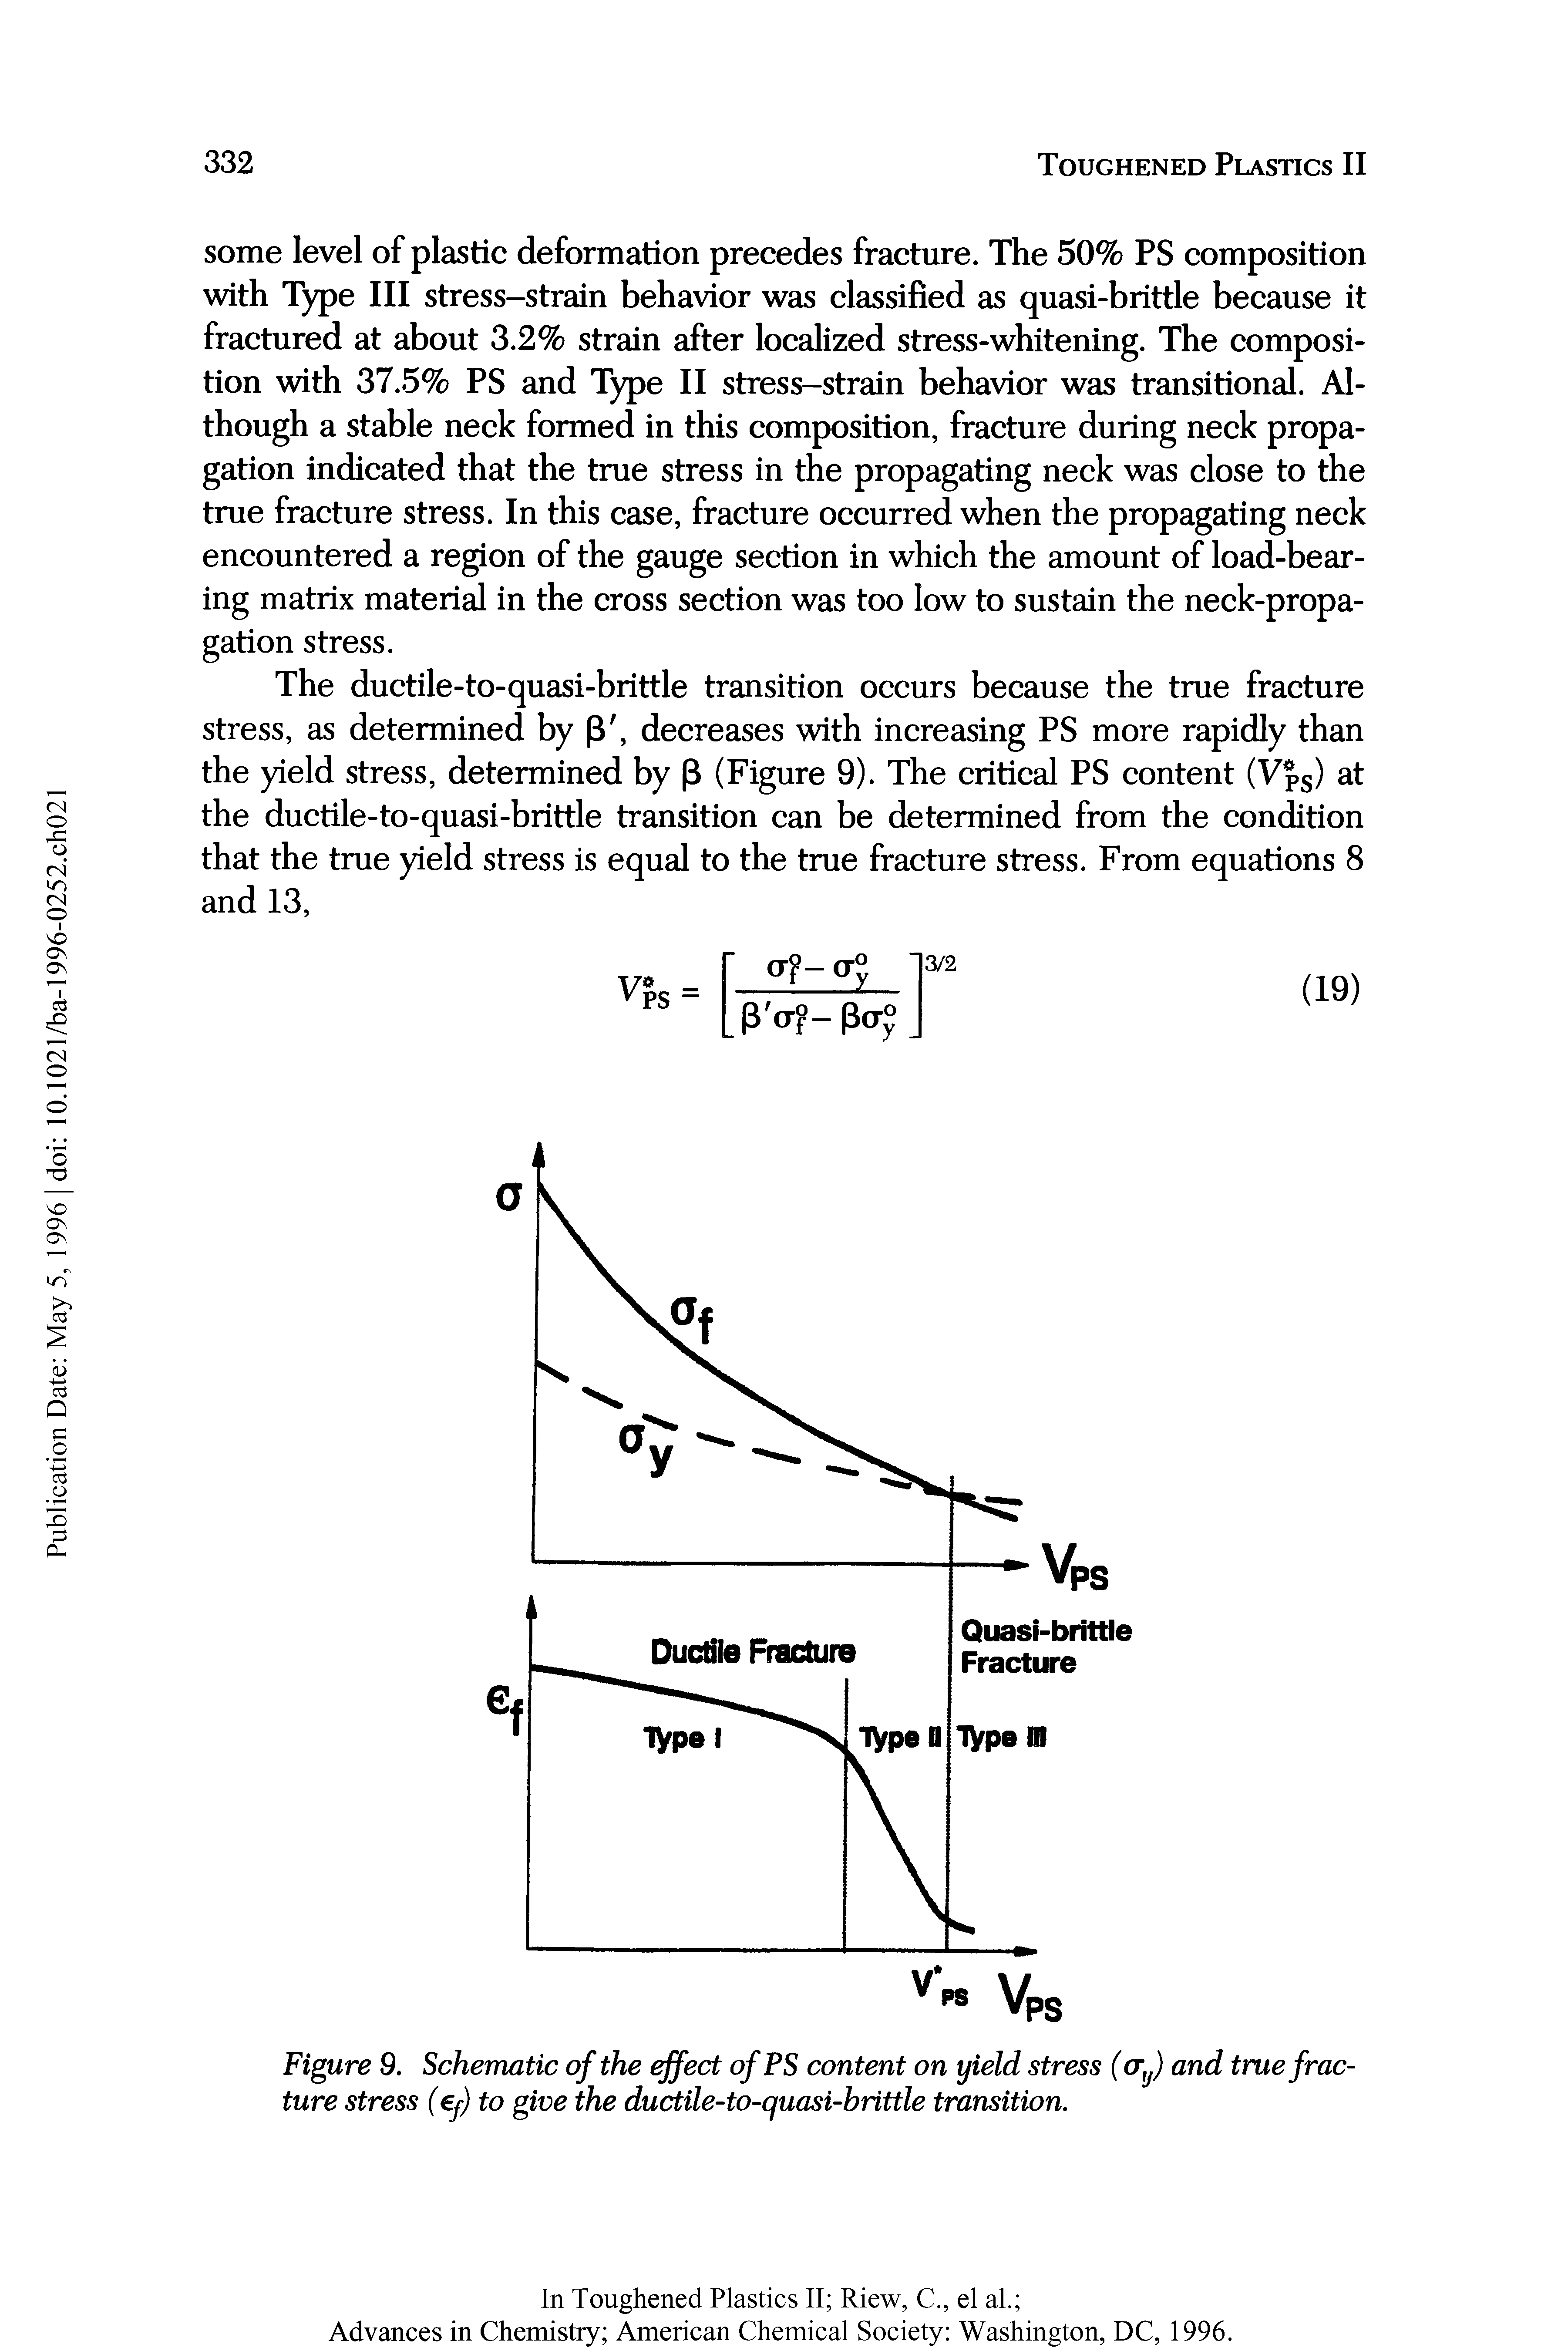 Figure 9. Schematic of the effect of PS content on yield stress (atJ) and true fracture stress (ef) to give the ductile-to-quasi-brittle transition.